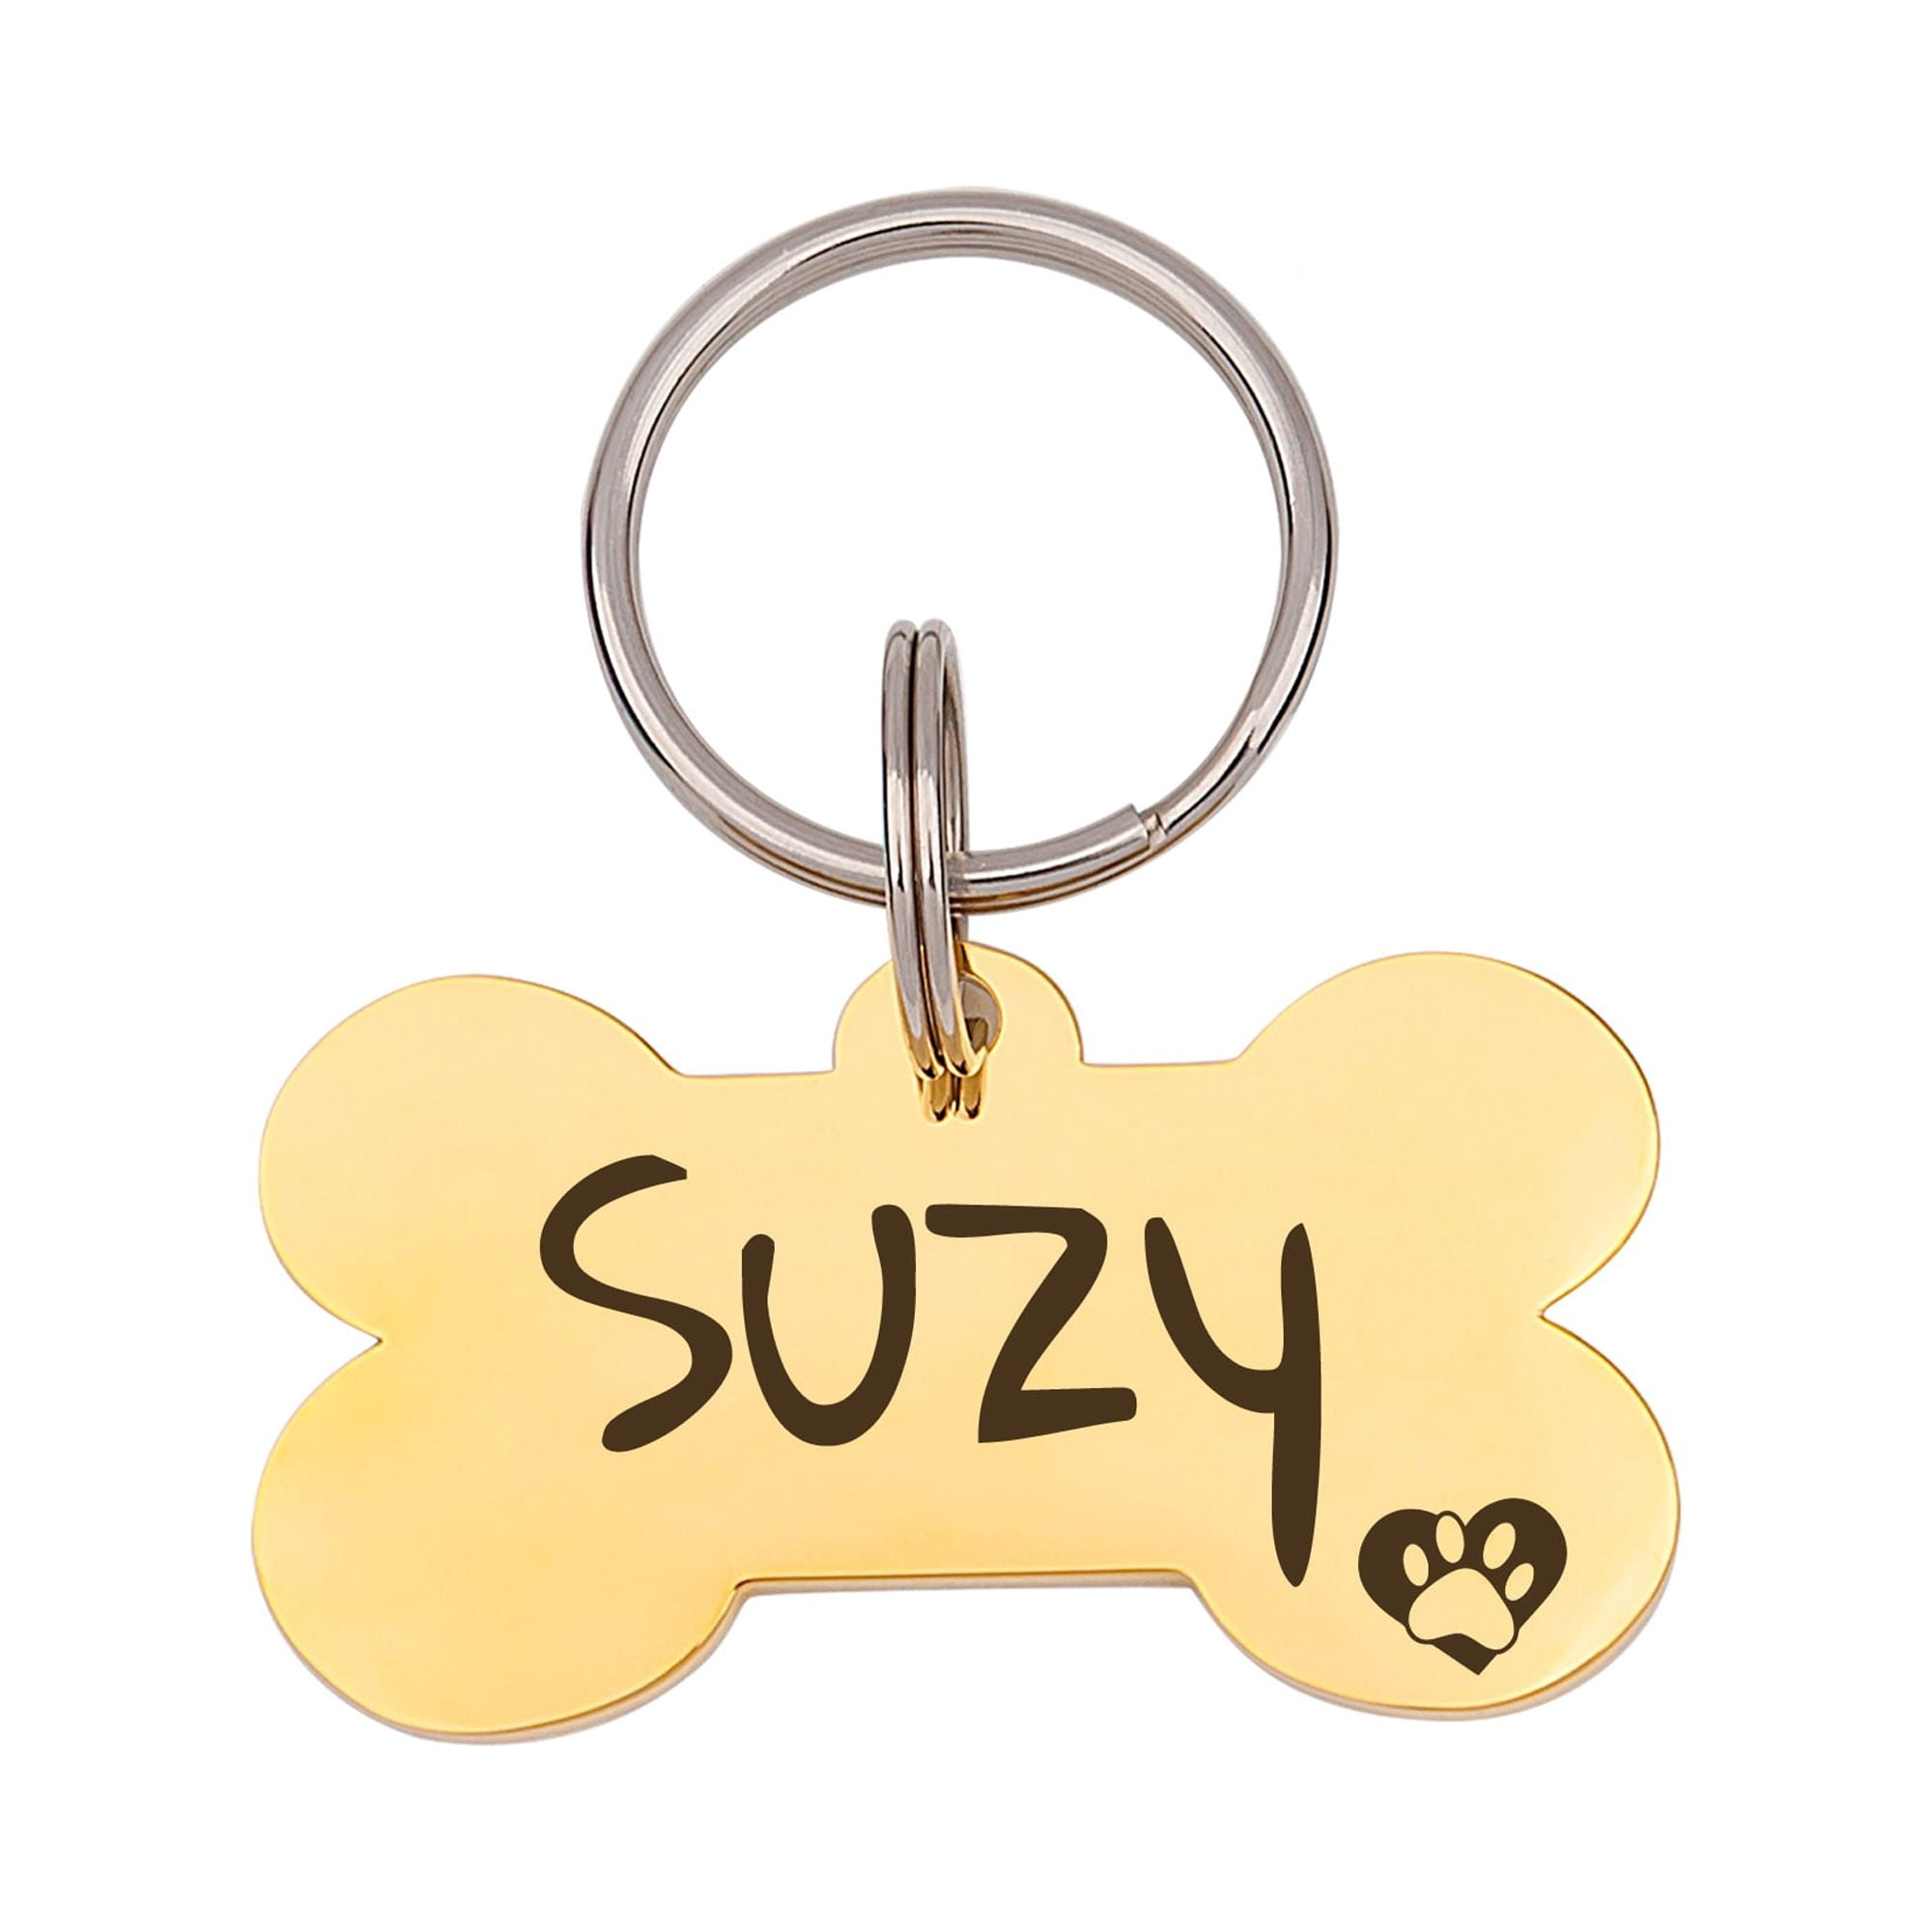 Funny Pet Tags  Custom Dog Tags for Dogs